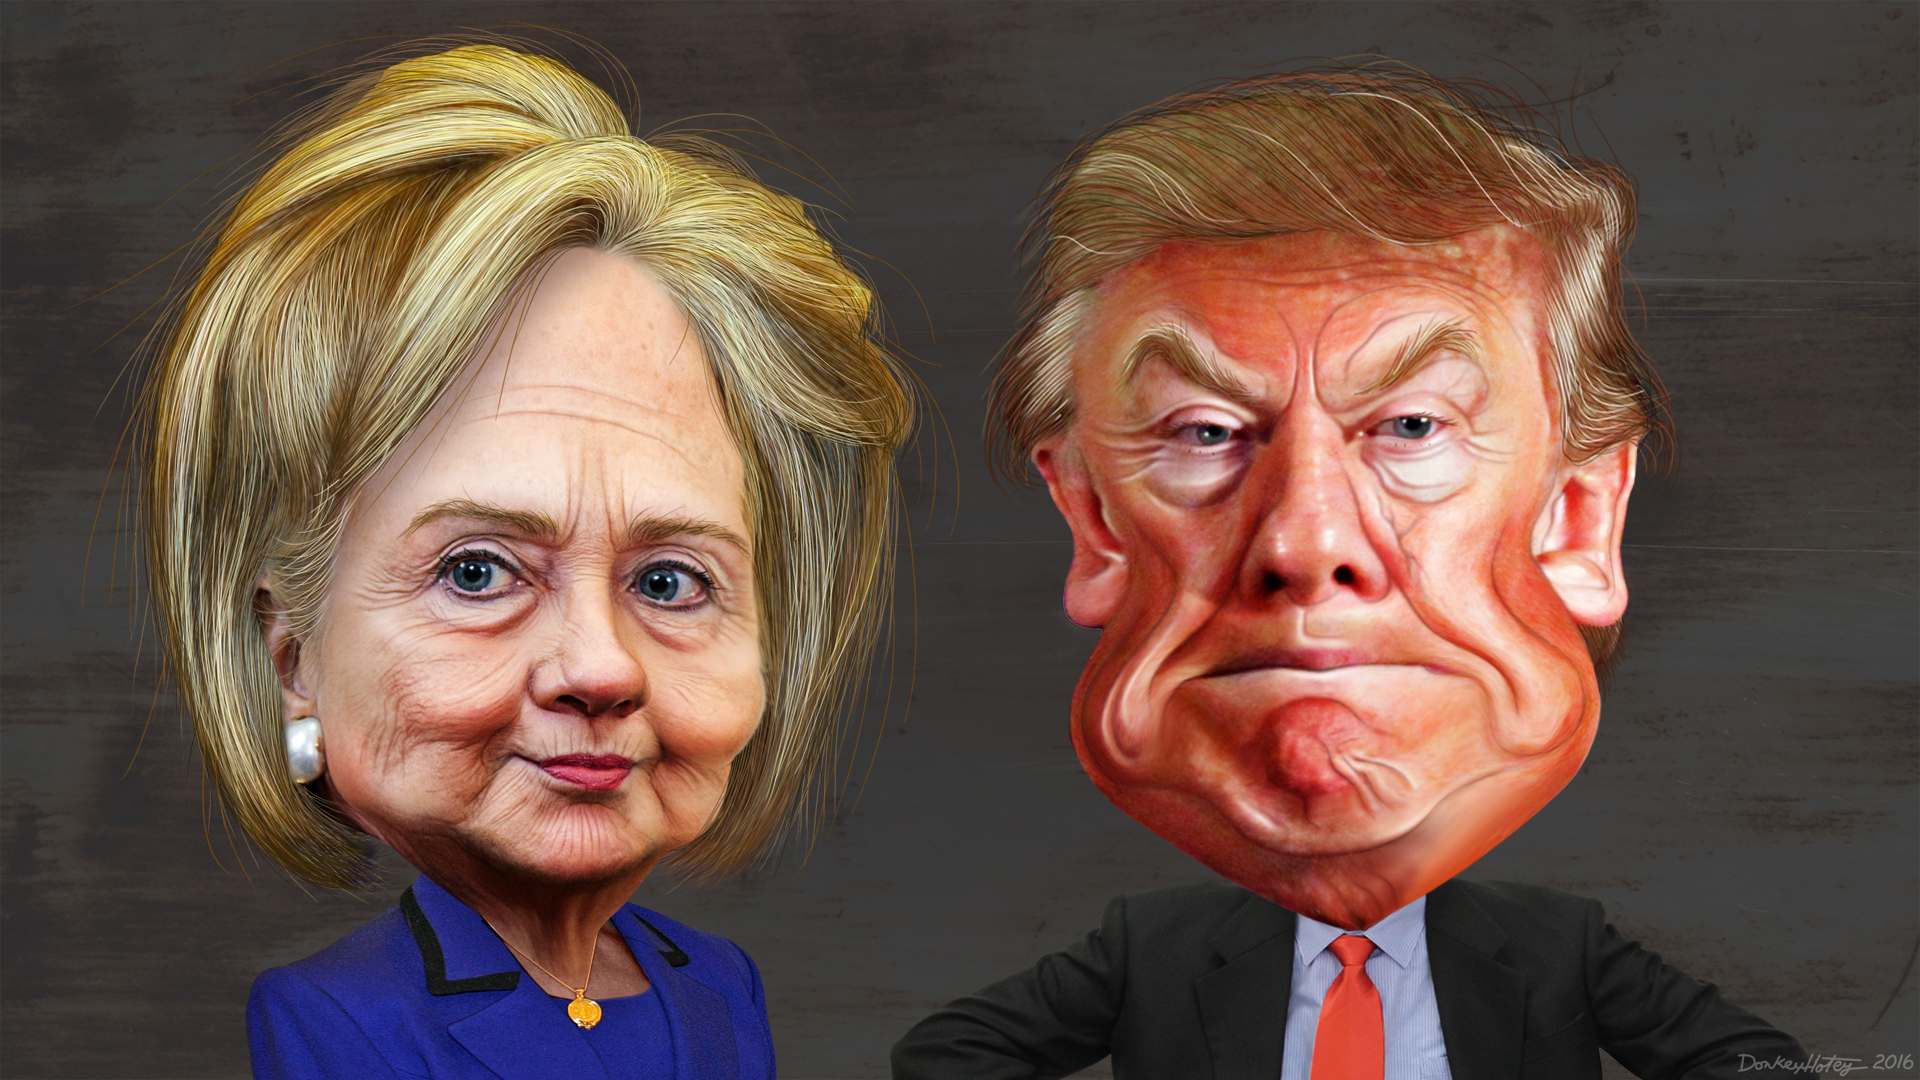 2016 us presidential election Donald Trump vs Hillary Clinton    Pros and Cons and Winner is...